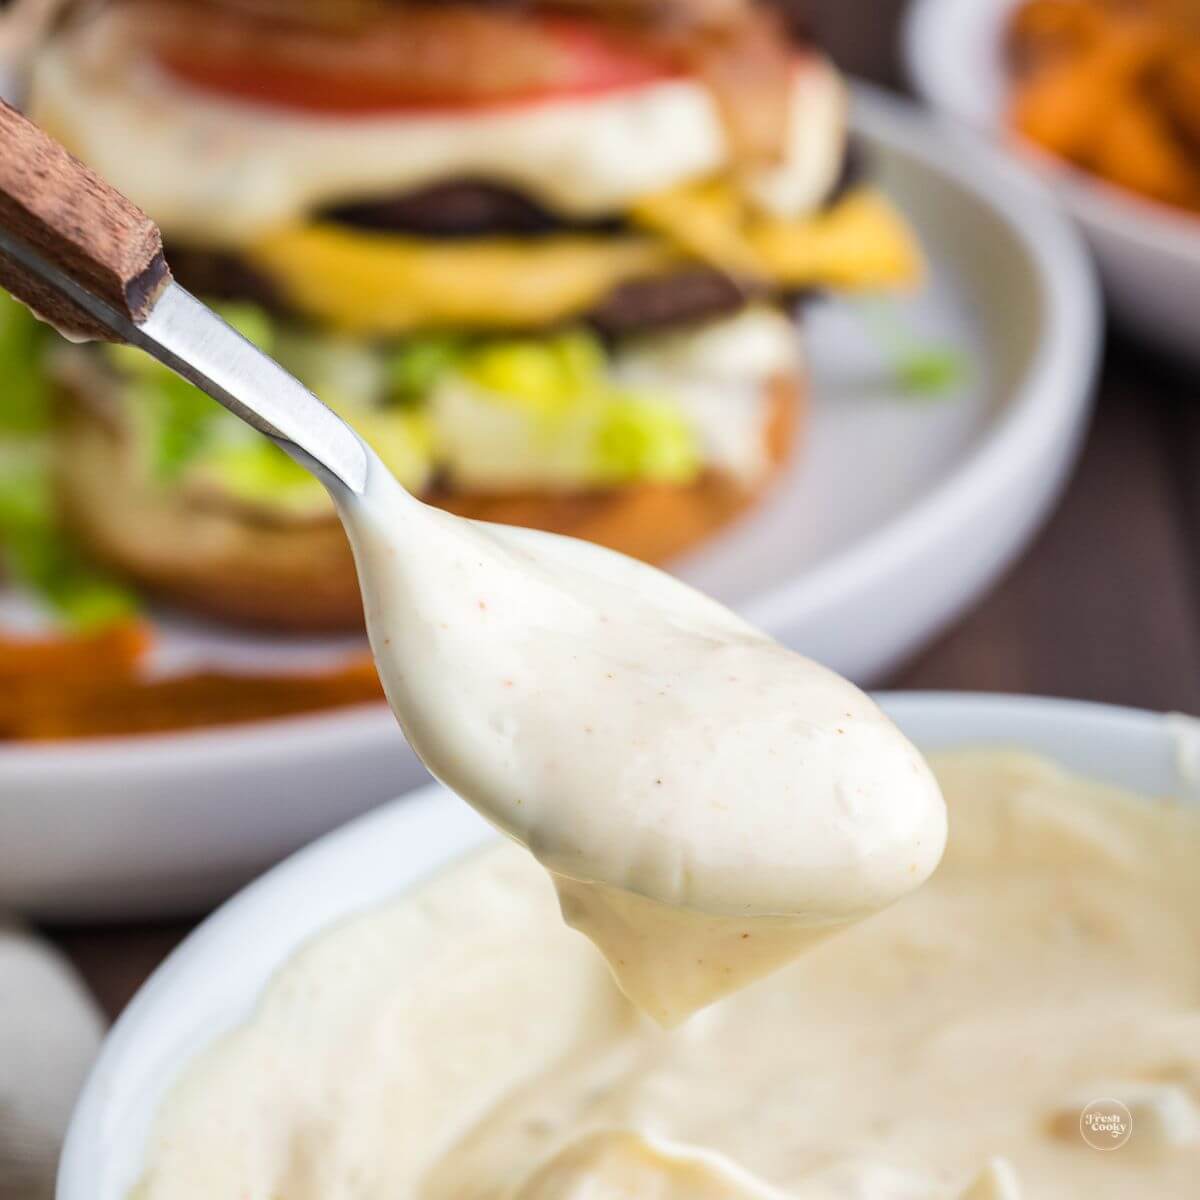 Easy smash burger sauce with spoon dipping in and cheeseburger with sauce in background.